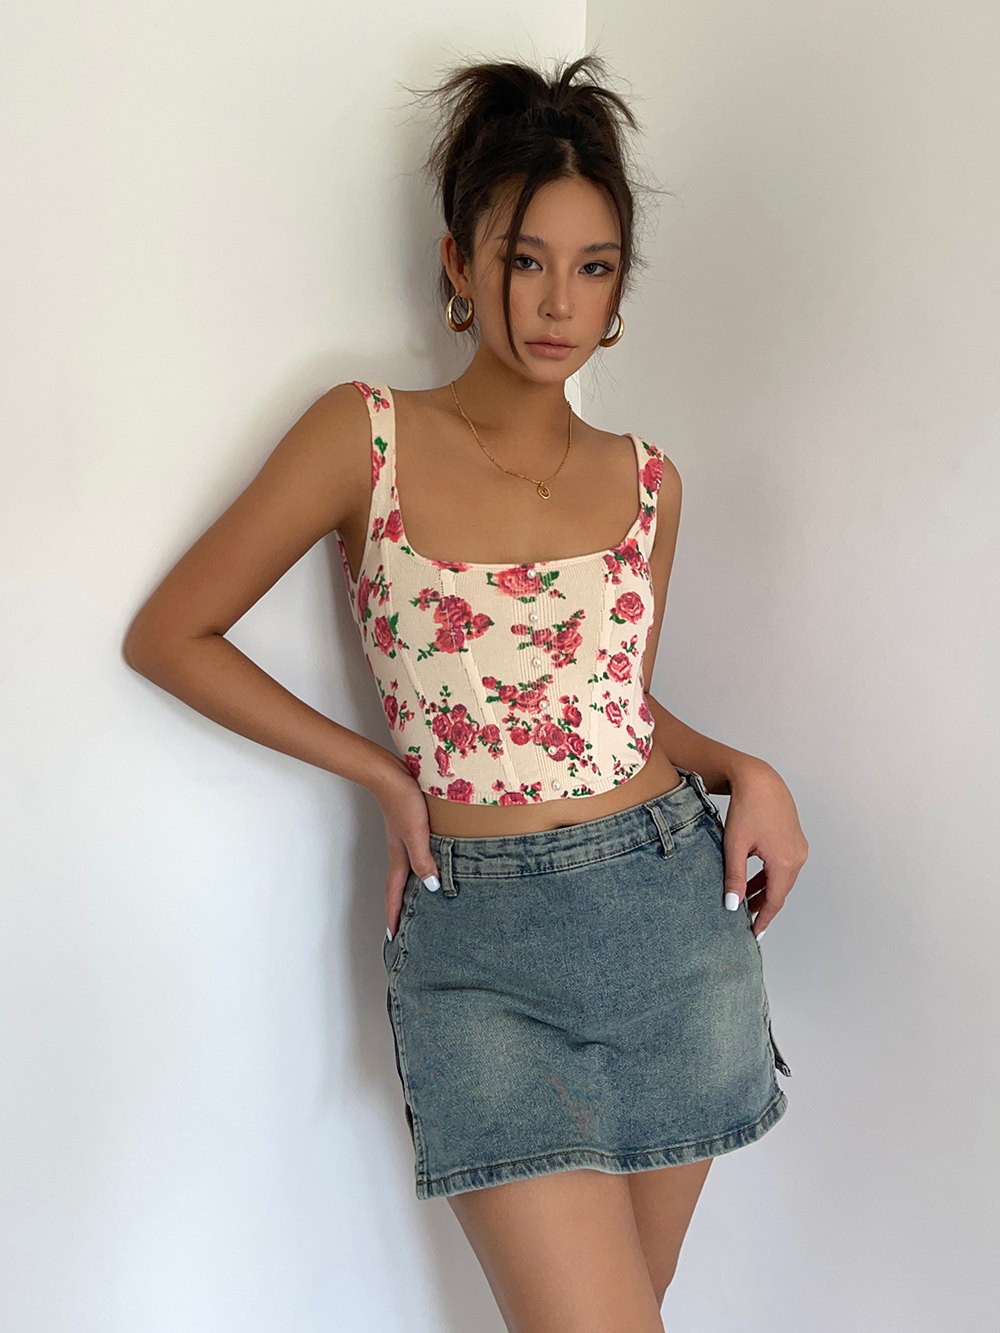 Floral Camisole Tank Top Sexy Short Slim High Waist Top